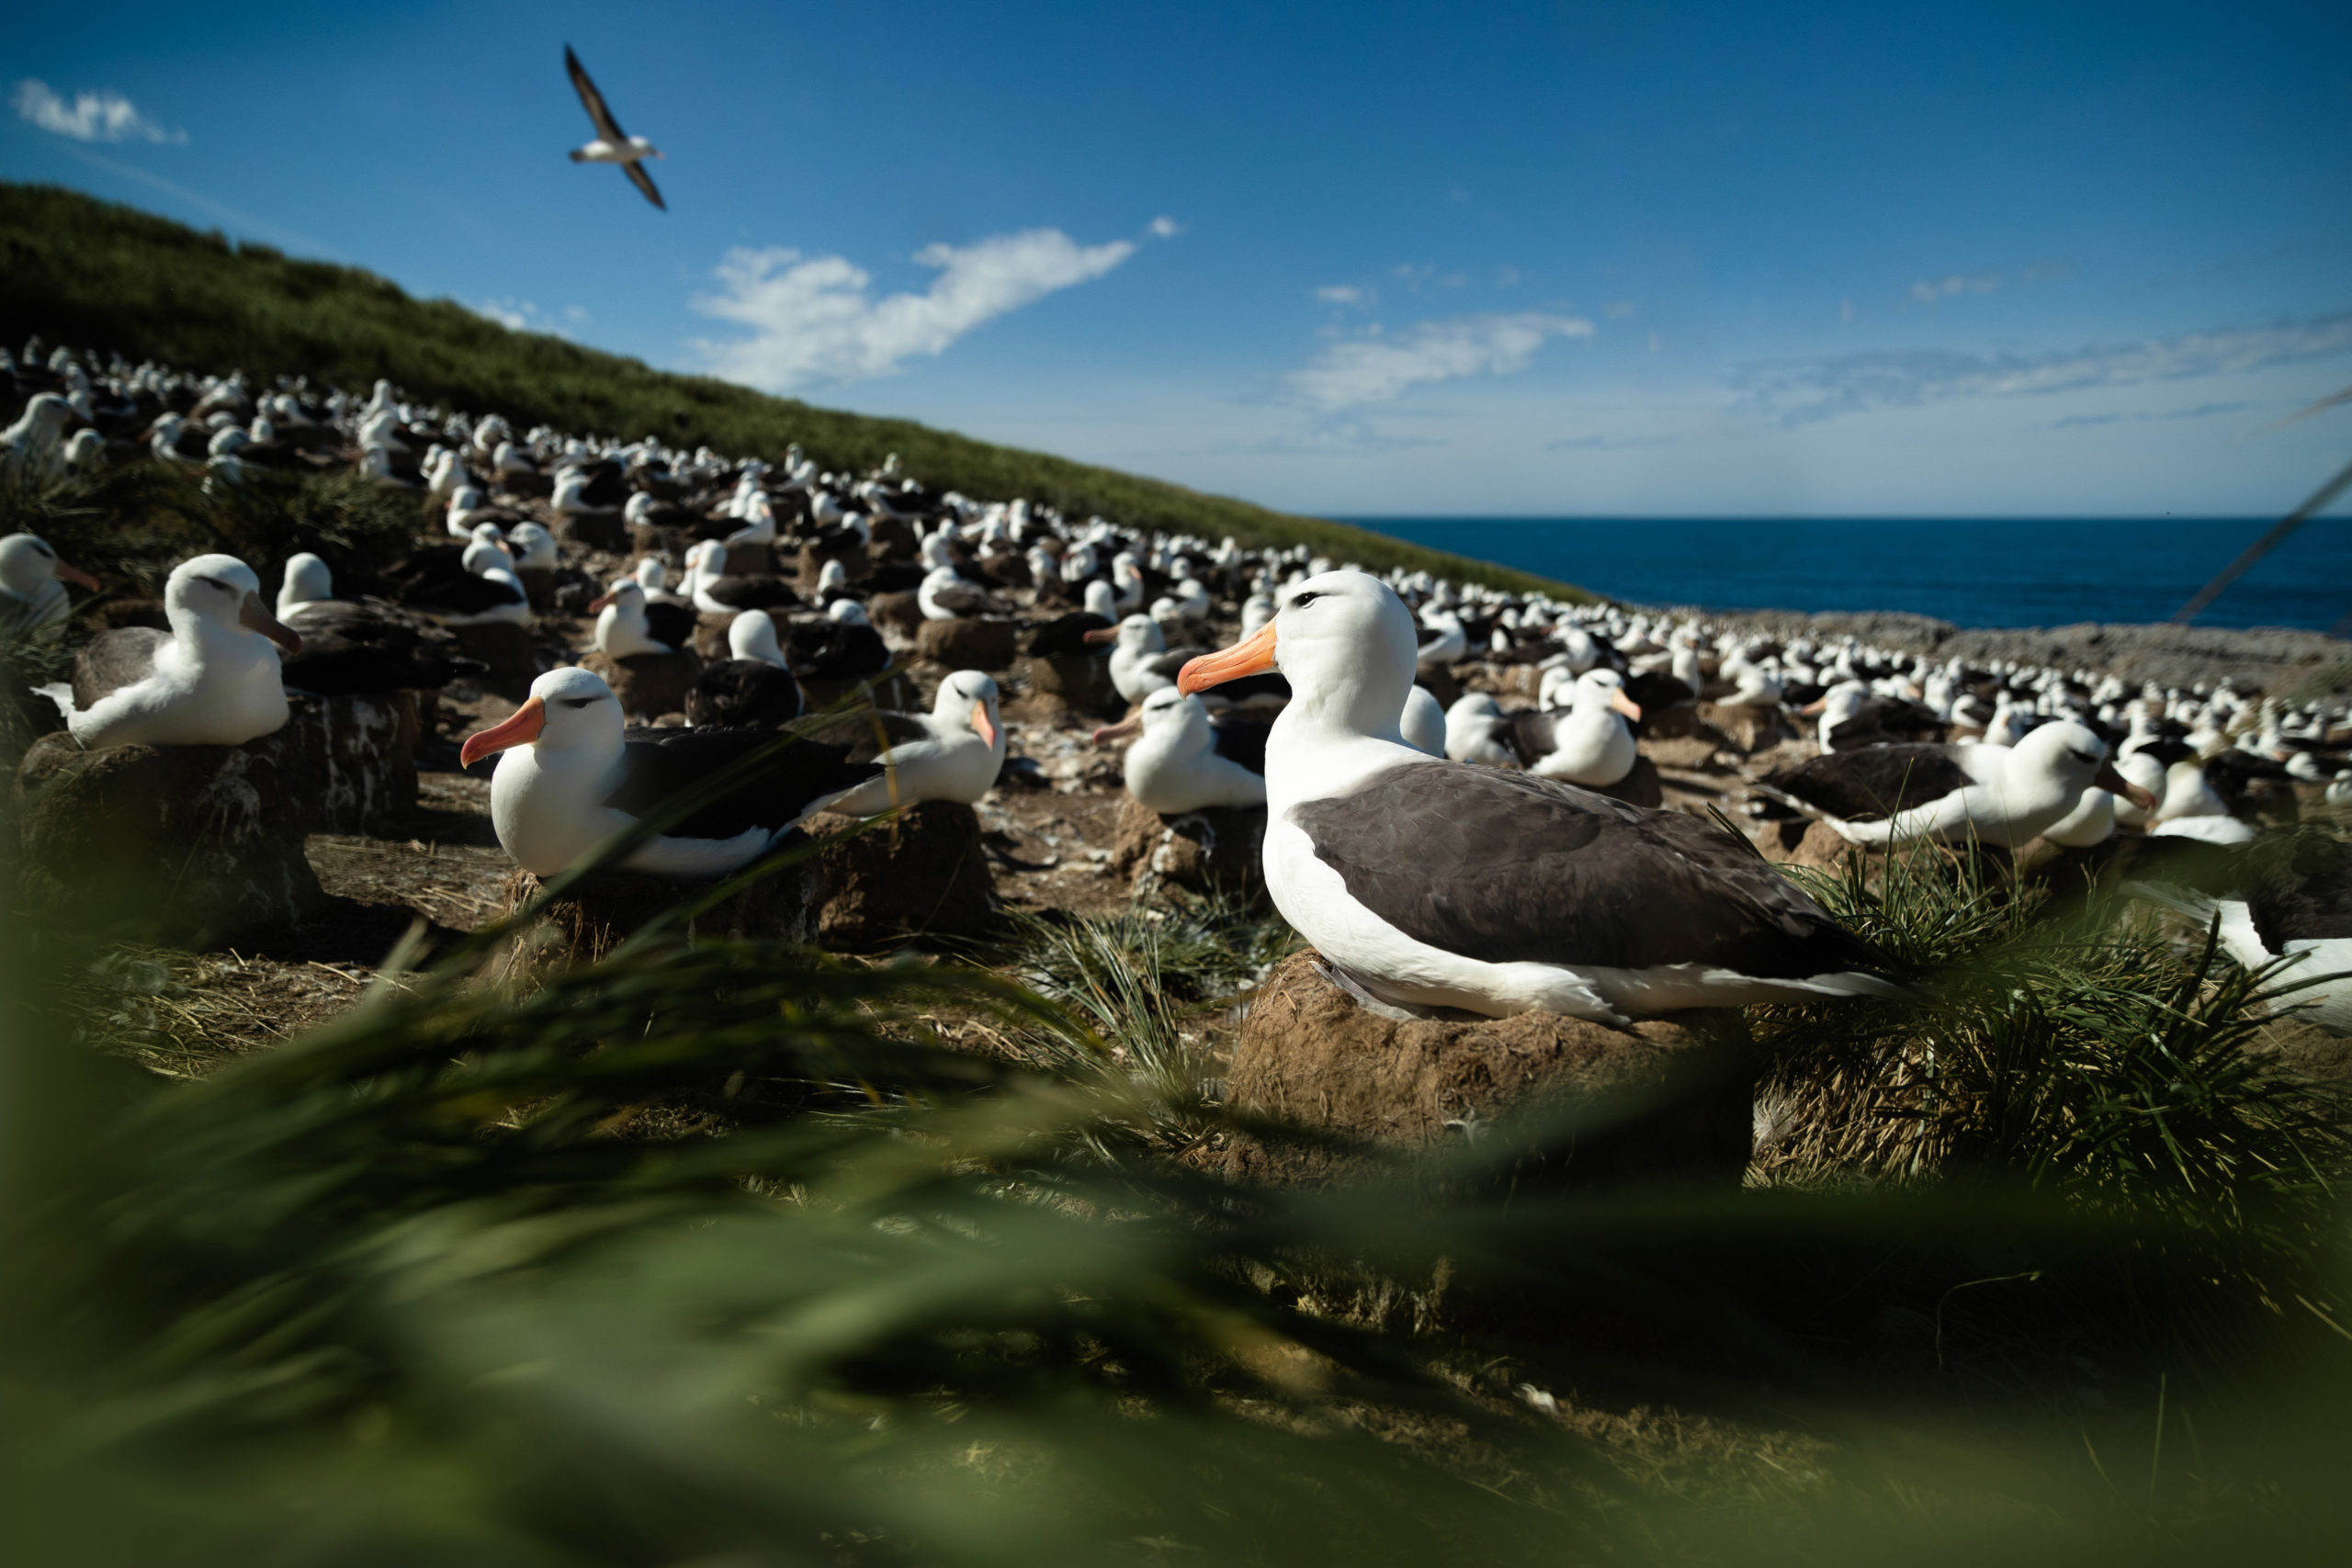 Wildlife photography of a large colony of nesting albatross on Steeple Jason Island in the Shetland Islands